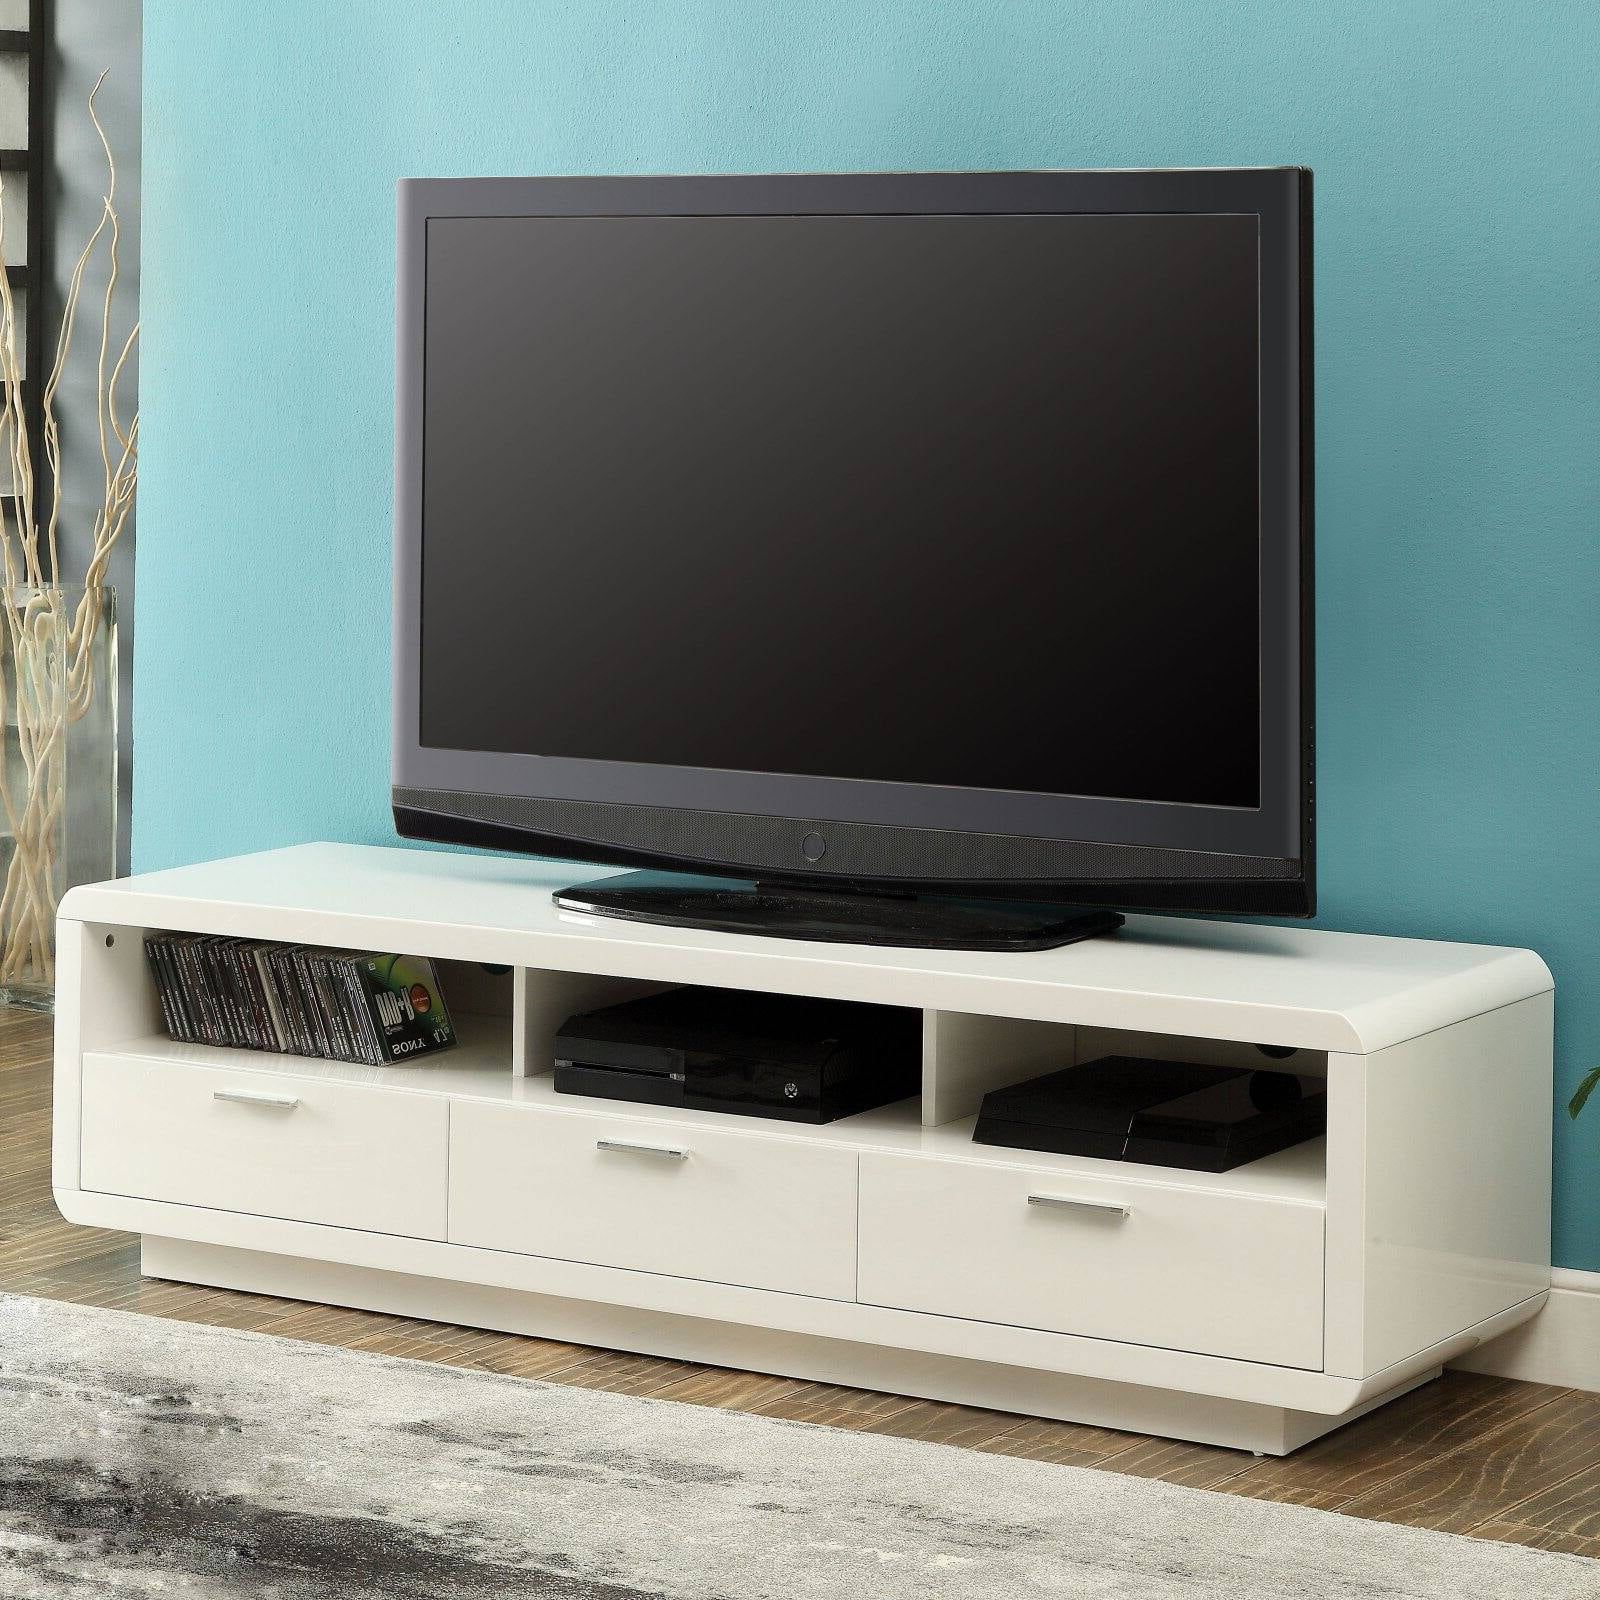 Stand For Flat Screen Regarding Fashionable Acme Randell White Tv Stand For Flat Screen Tvs Up To 60" – Walmart (View 13 of 15)